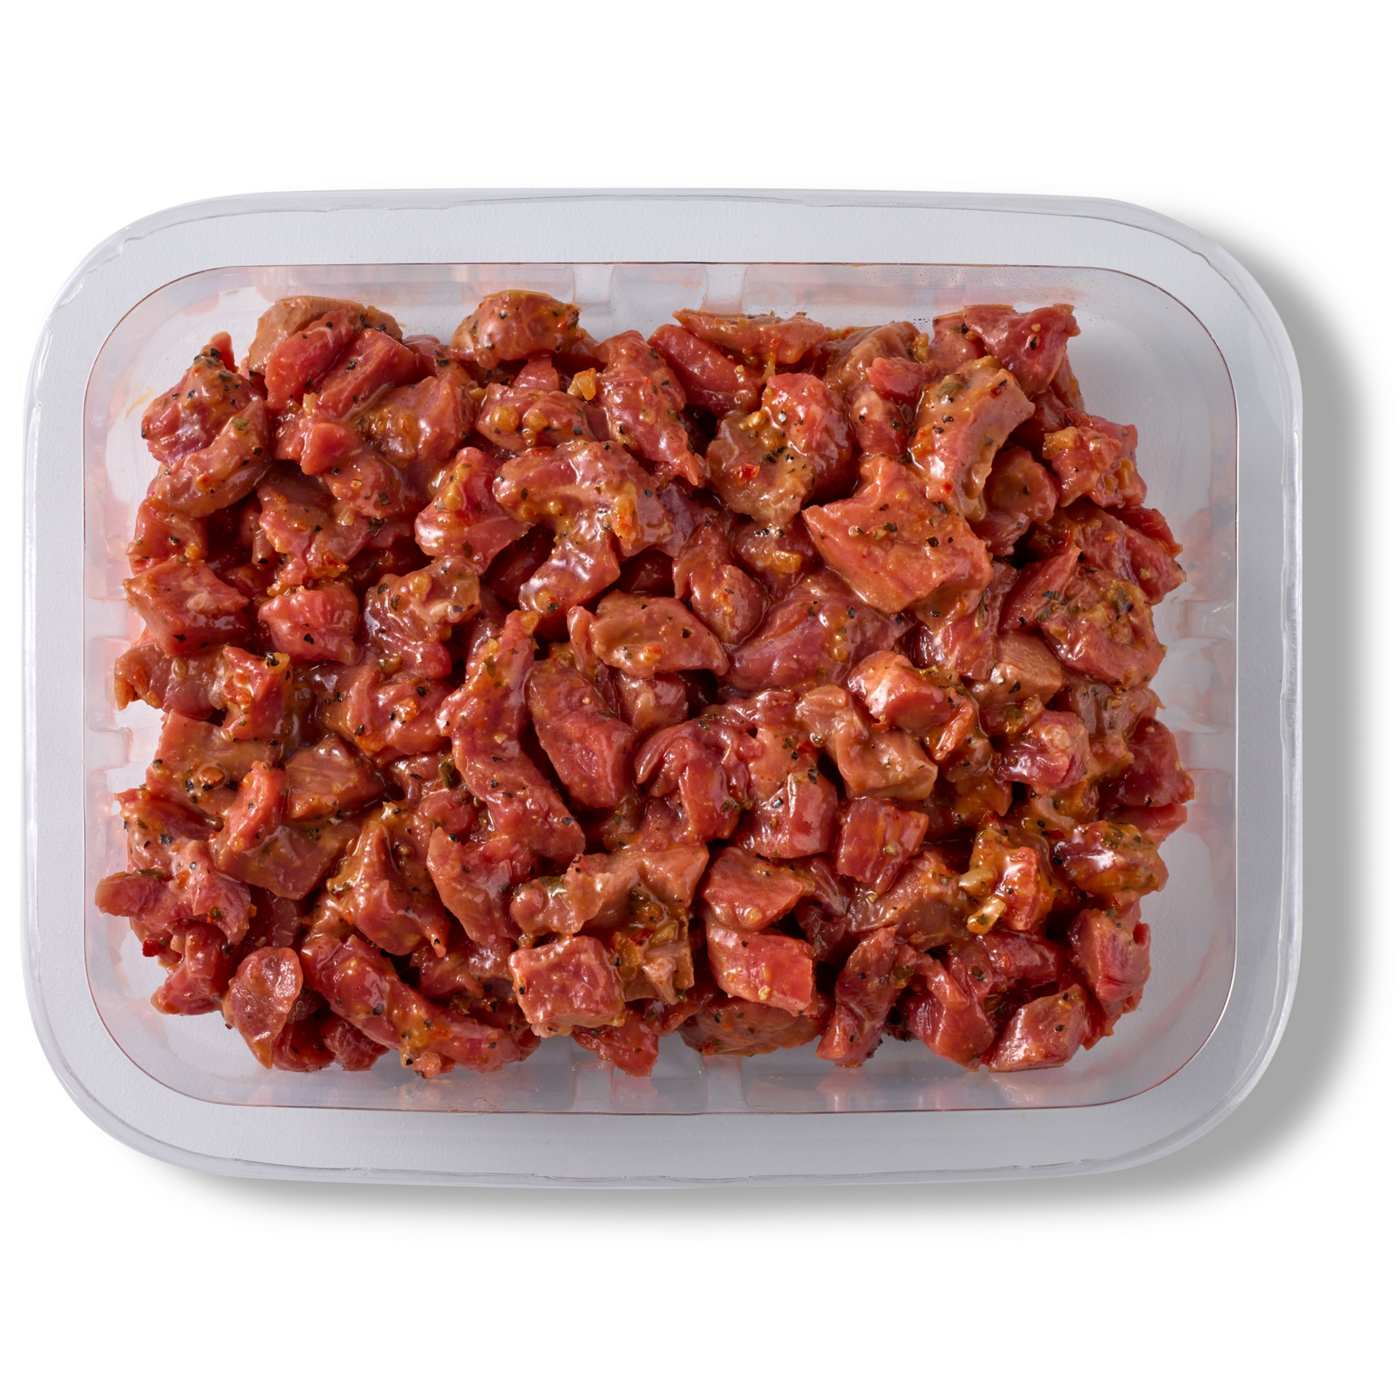 H-E-B Meat Market Marinated Diced Beef - Southwest Style; image 1 of 3